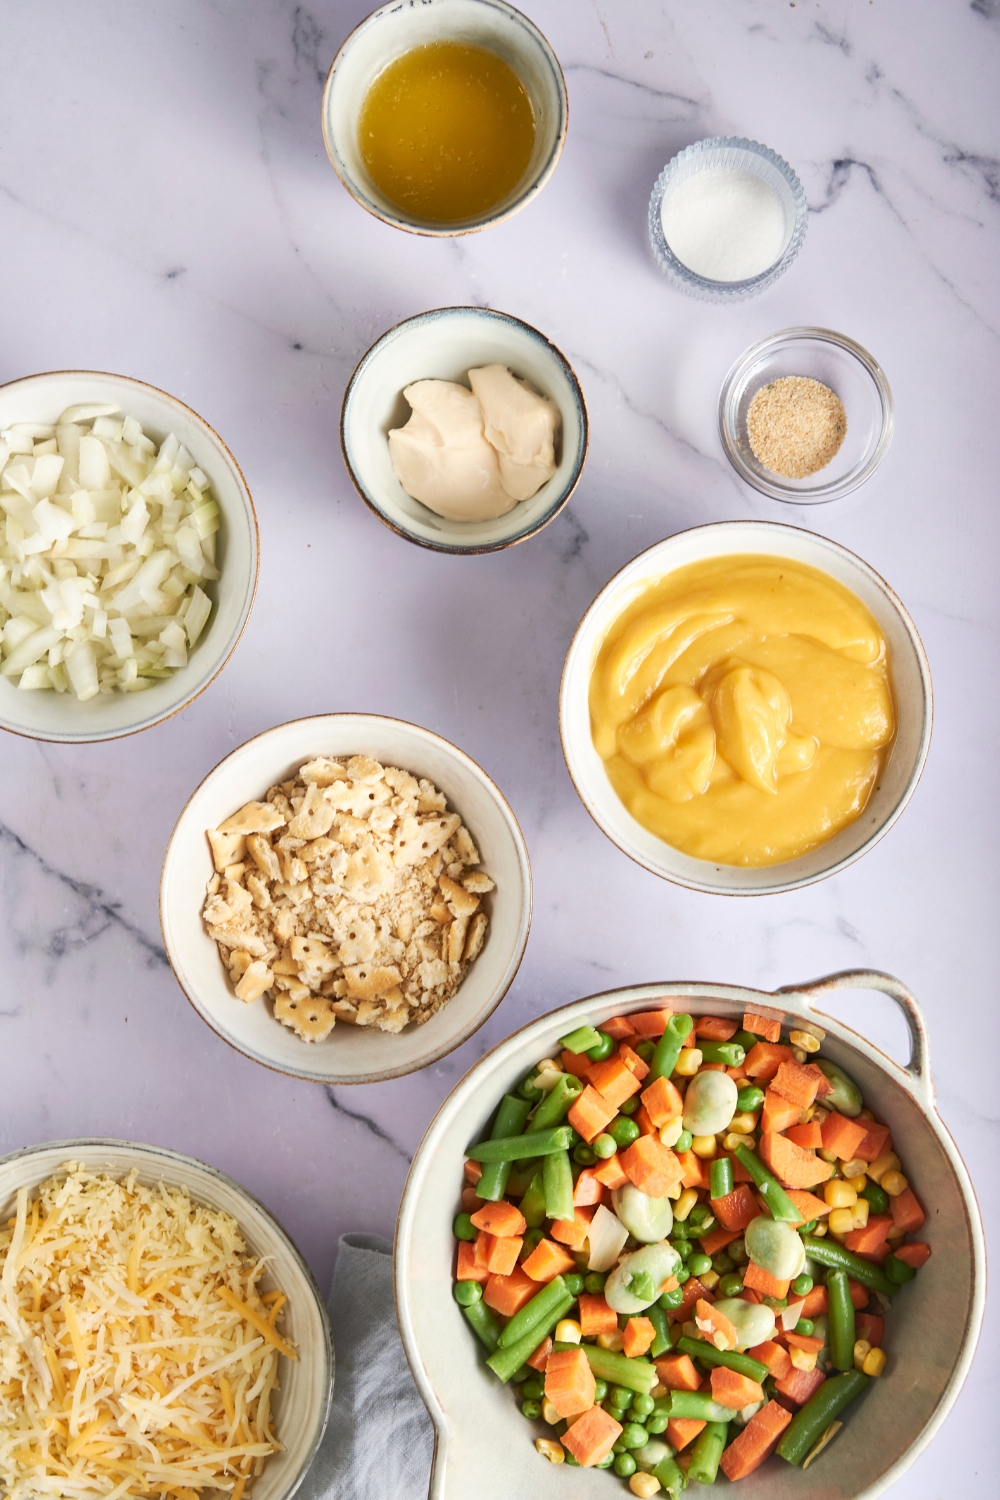 Mixed vegetables, shredded cheese, cracker crumbs, cream soup, onions, mayonnaise, seasonings, and chicken broth are all in separate bowls on a marble counter.